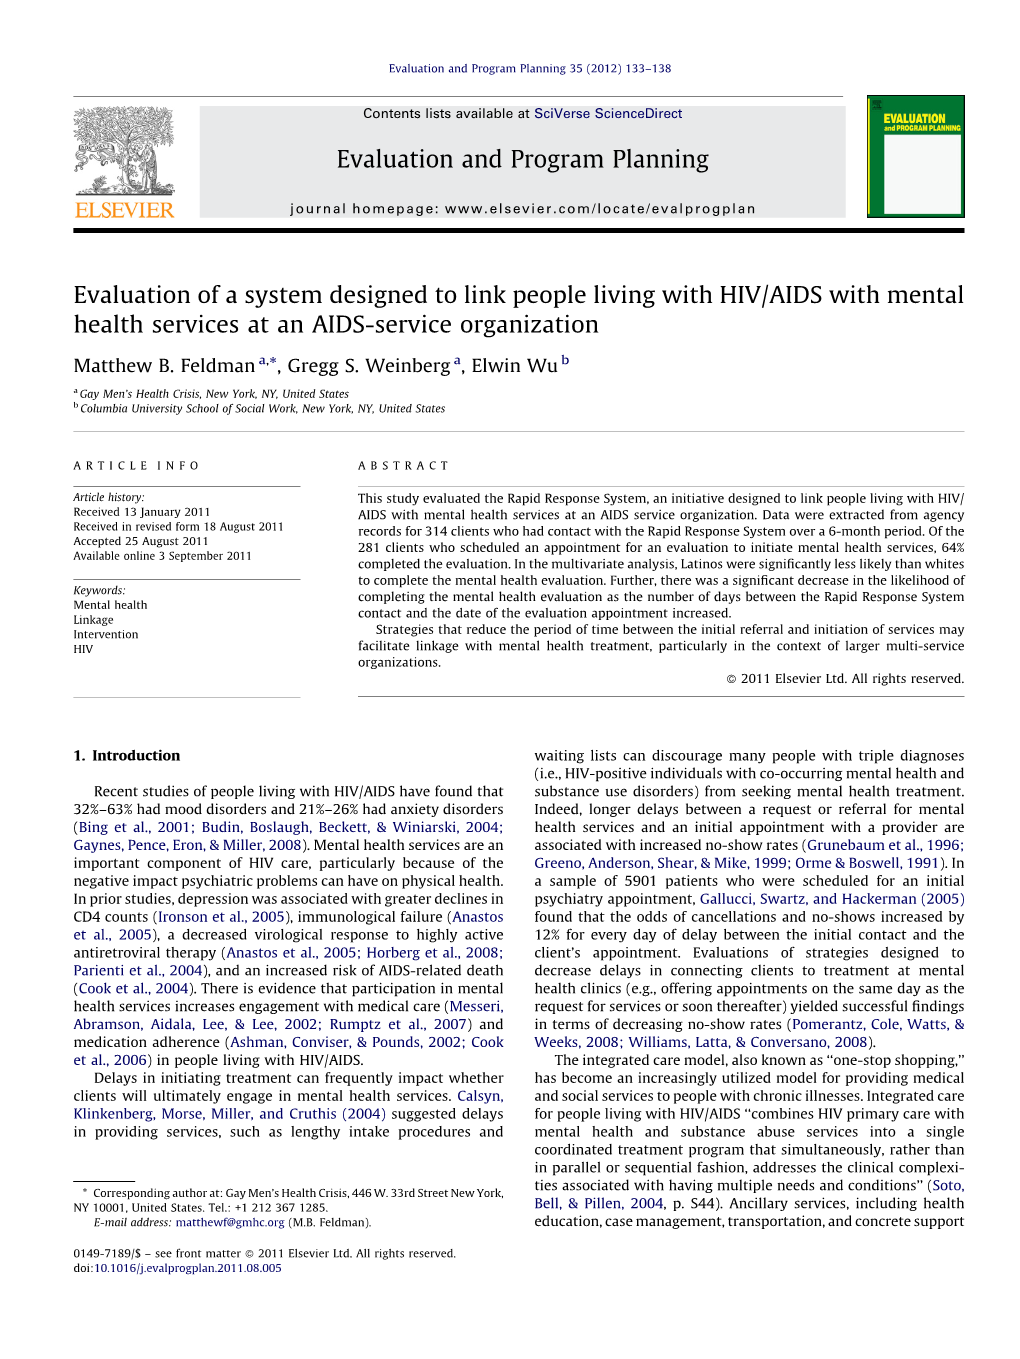 Evaluation of a System Designed to Link People Living with HIV/AIDS with Mental